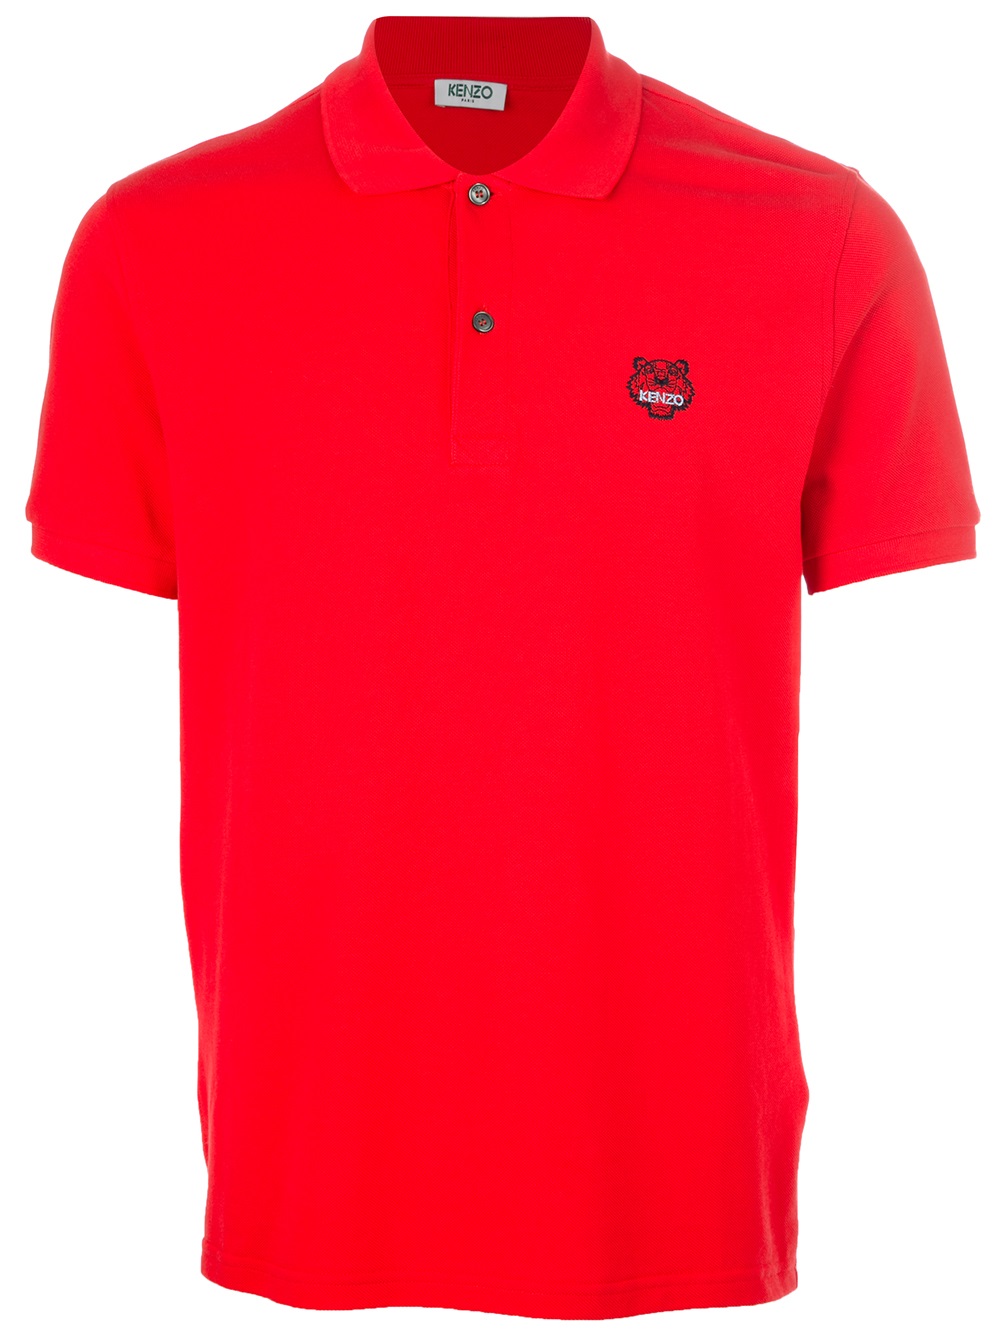 Lyst - Kenzo Tiger Polo Shirt in Red for Men